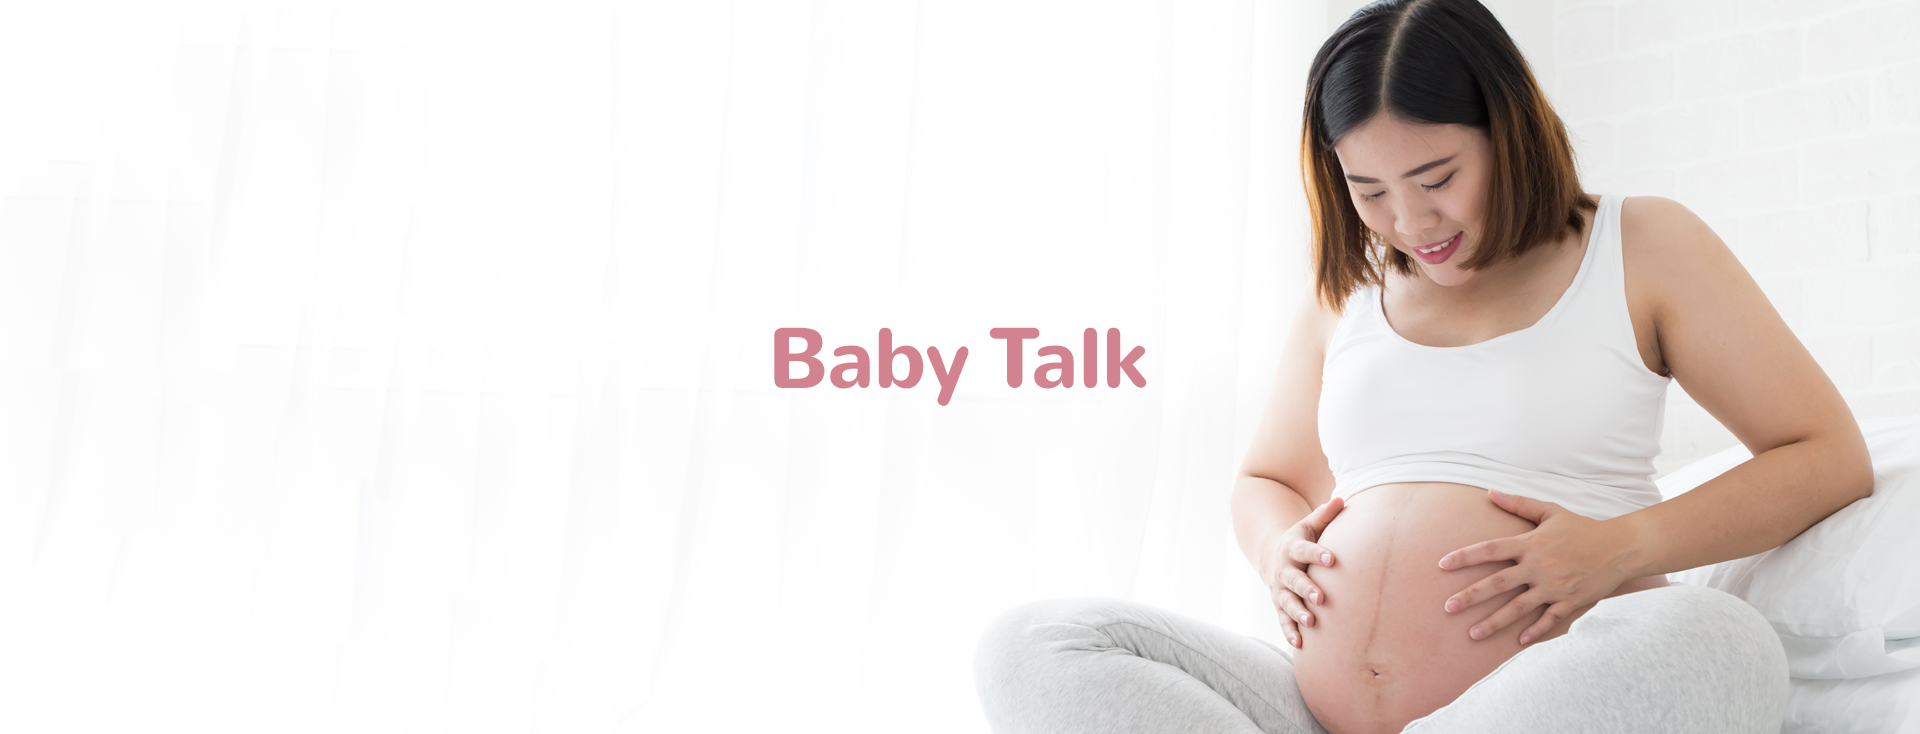 Baby Talk: Why it’s Important to Baby Talk Your Child Before Birth